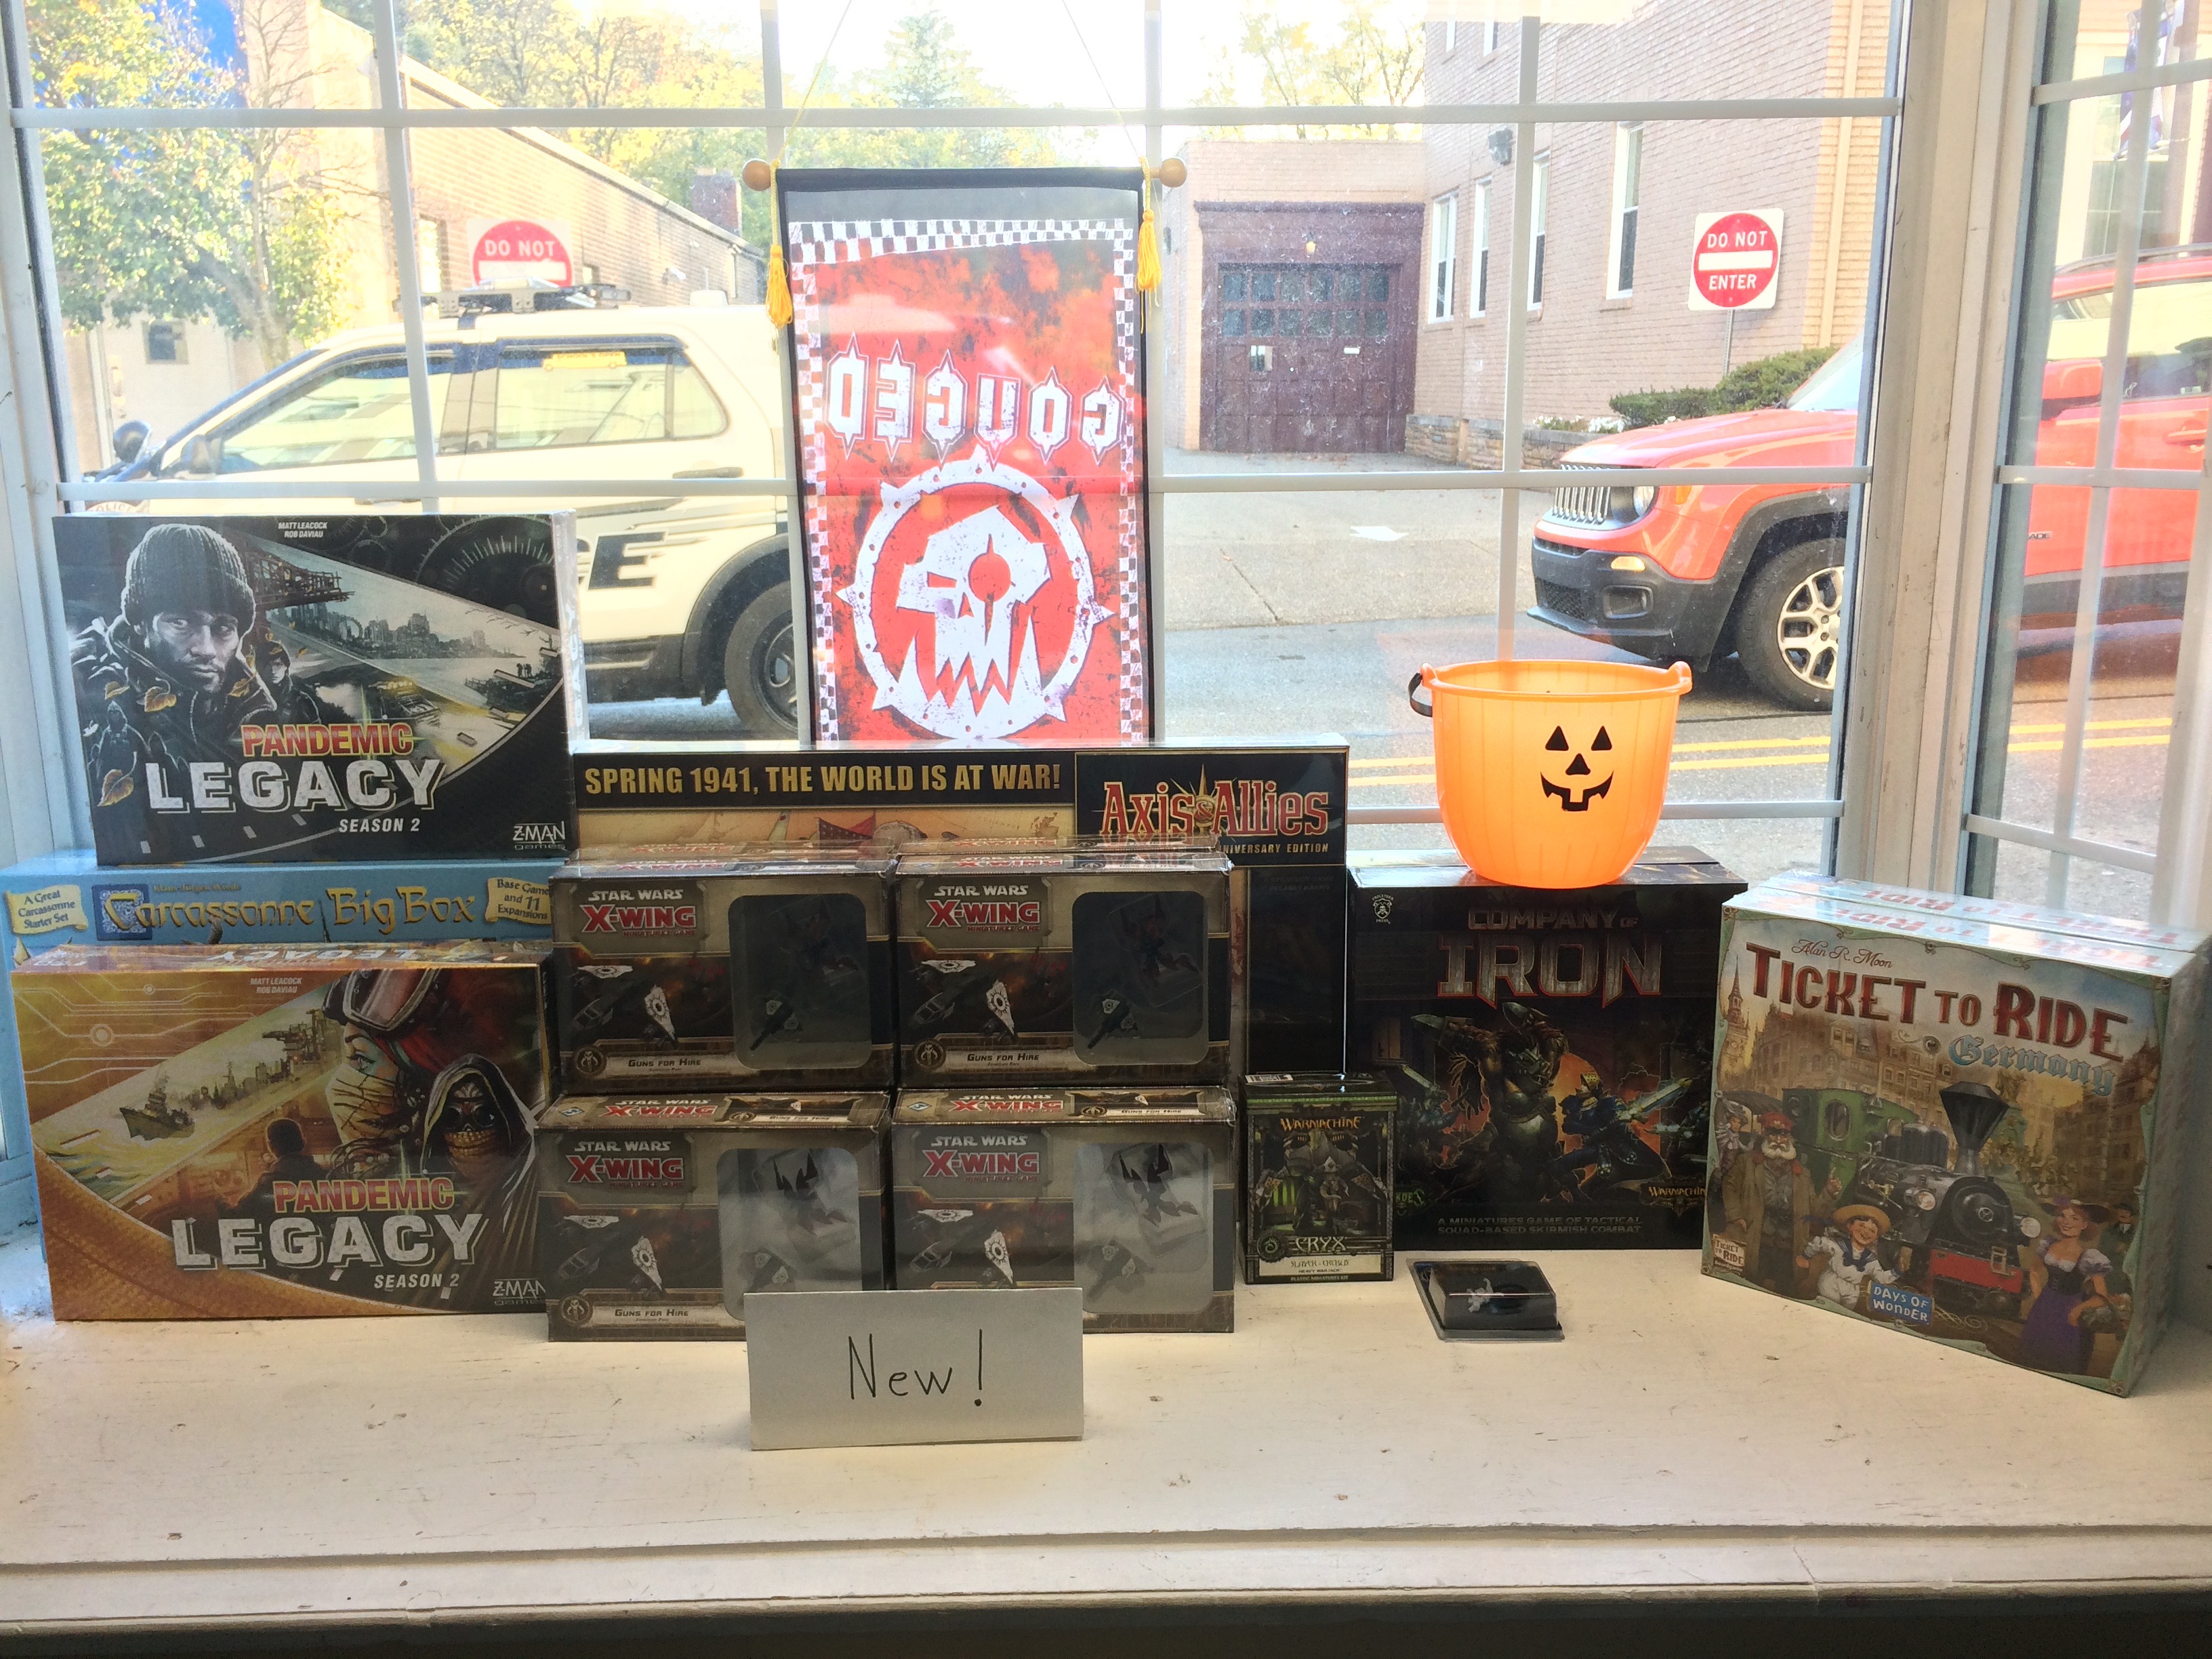 Guns for Hire, Ticket to Ride Germany, the Carcassonne Big Box, and More!